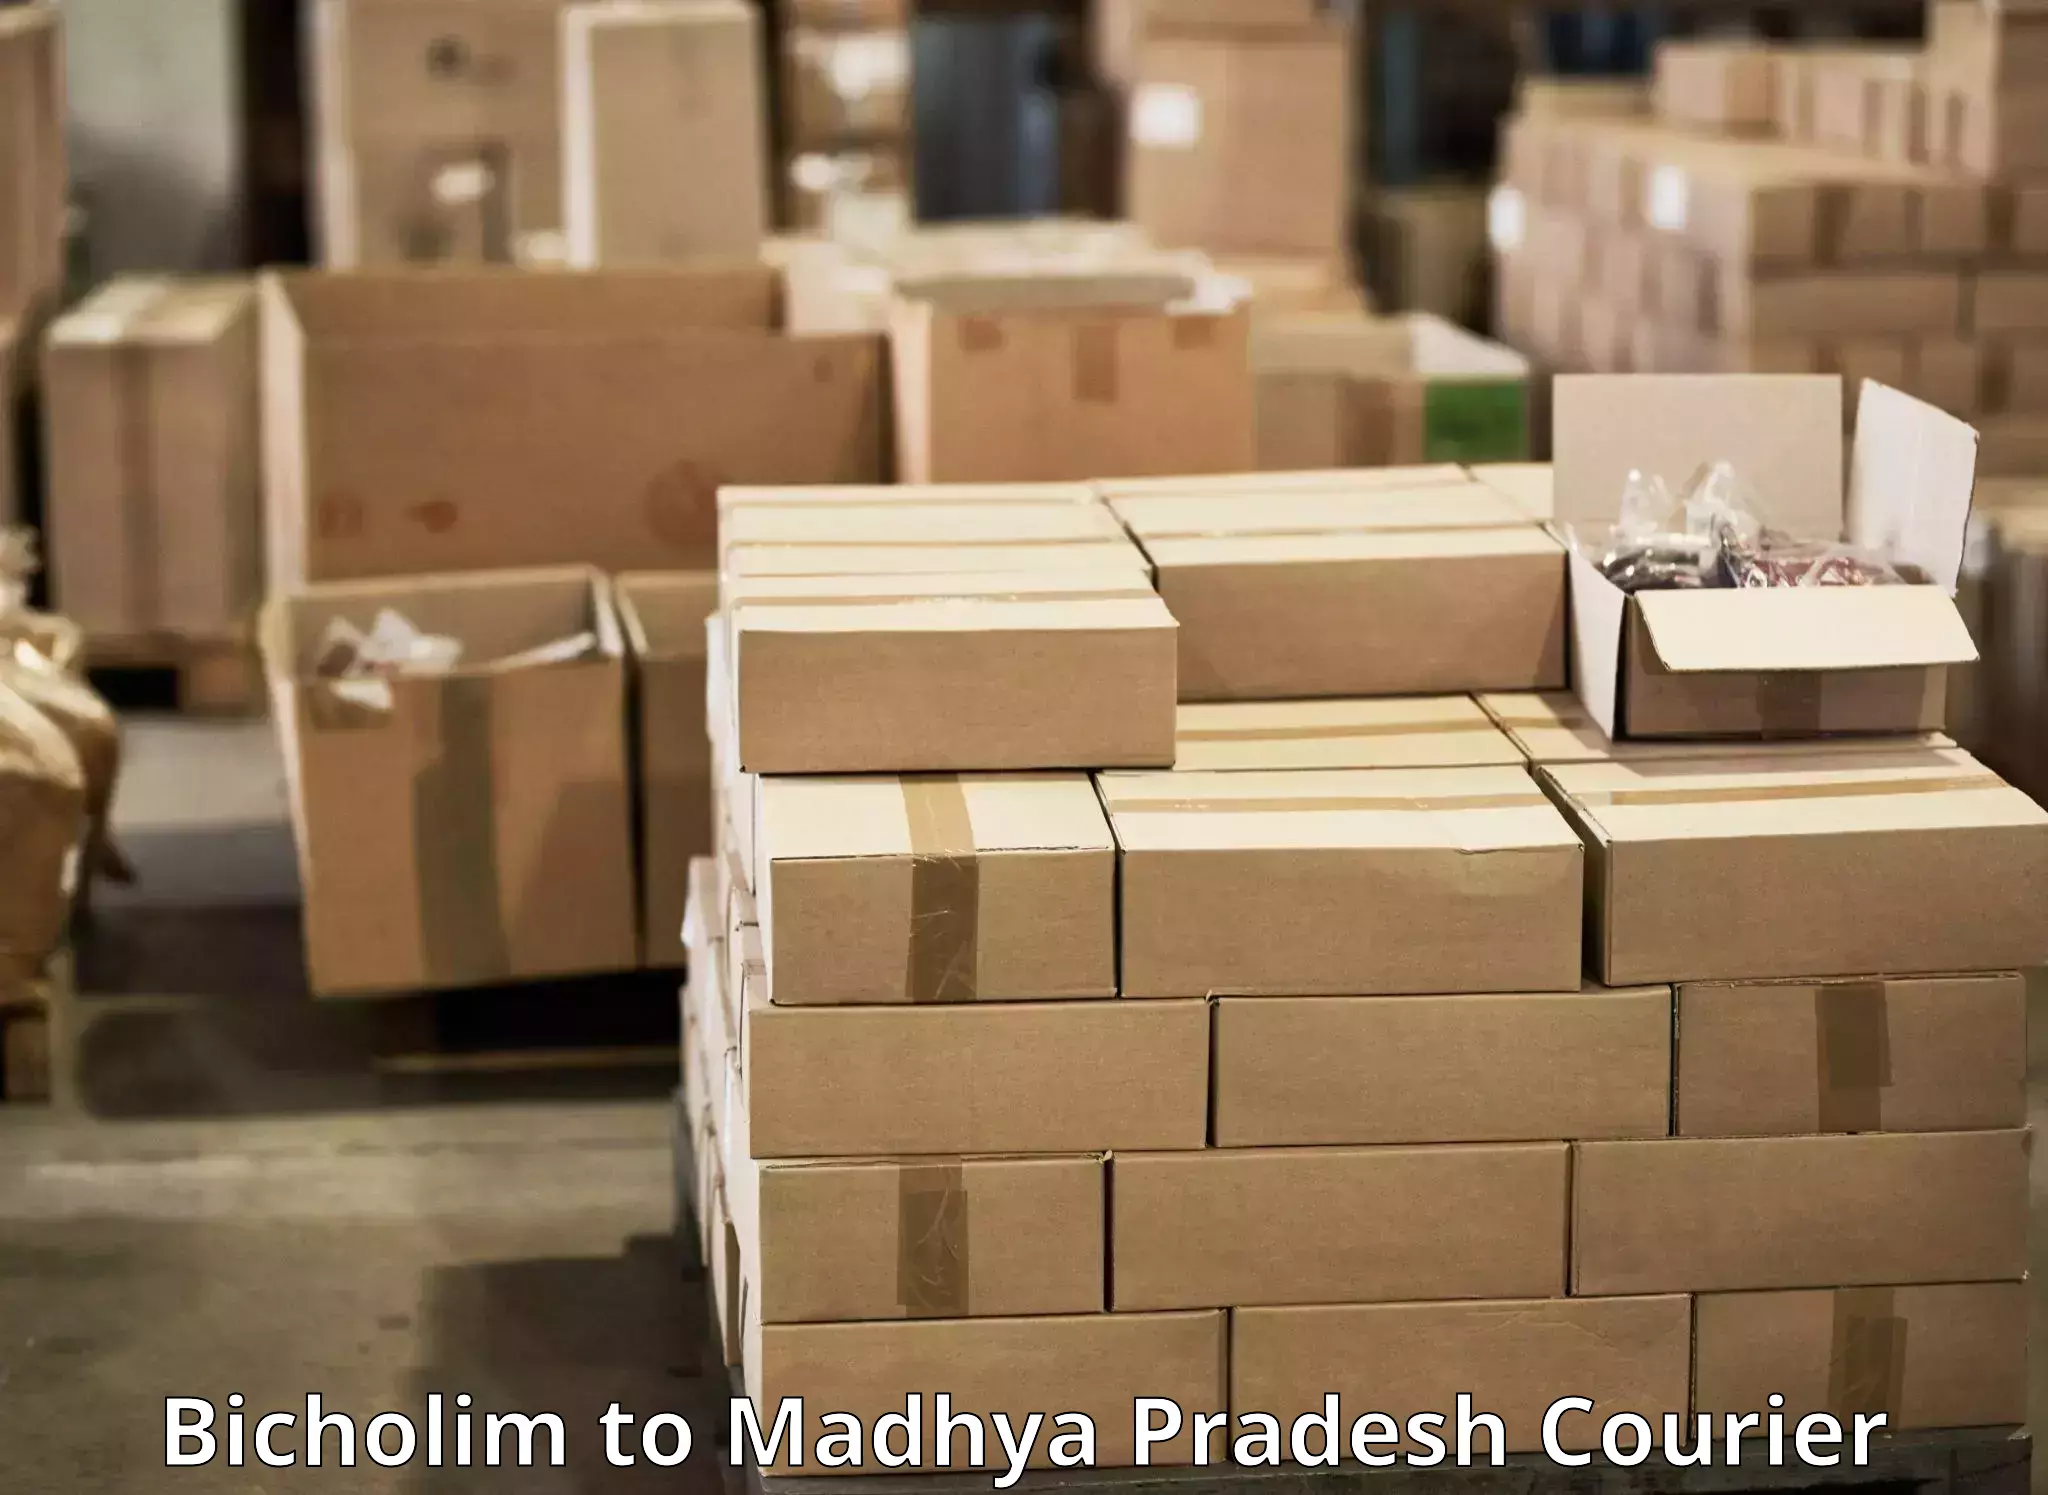 Express package delivery Bicholim to Madwas